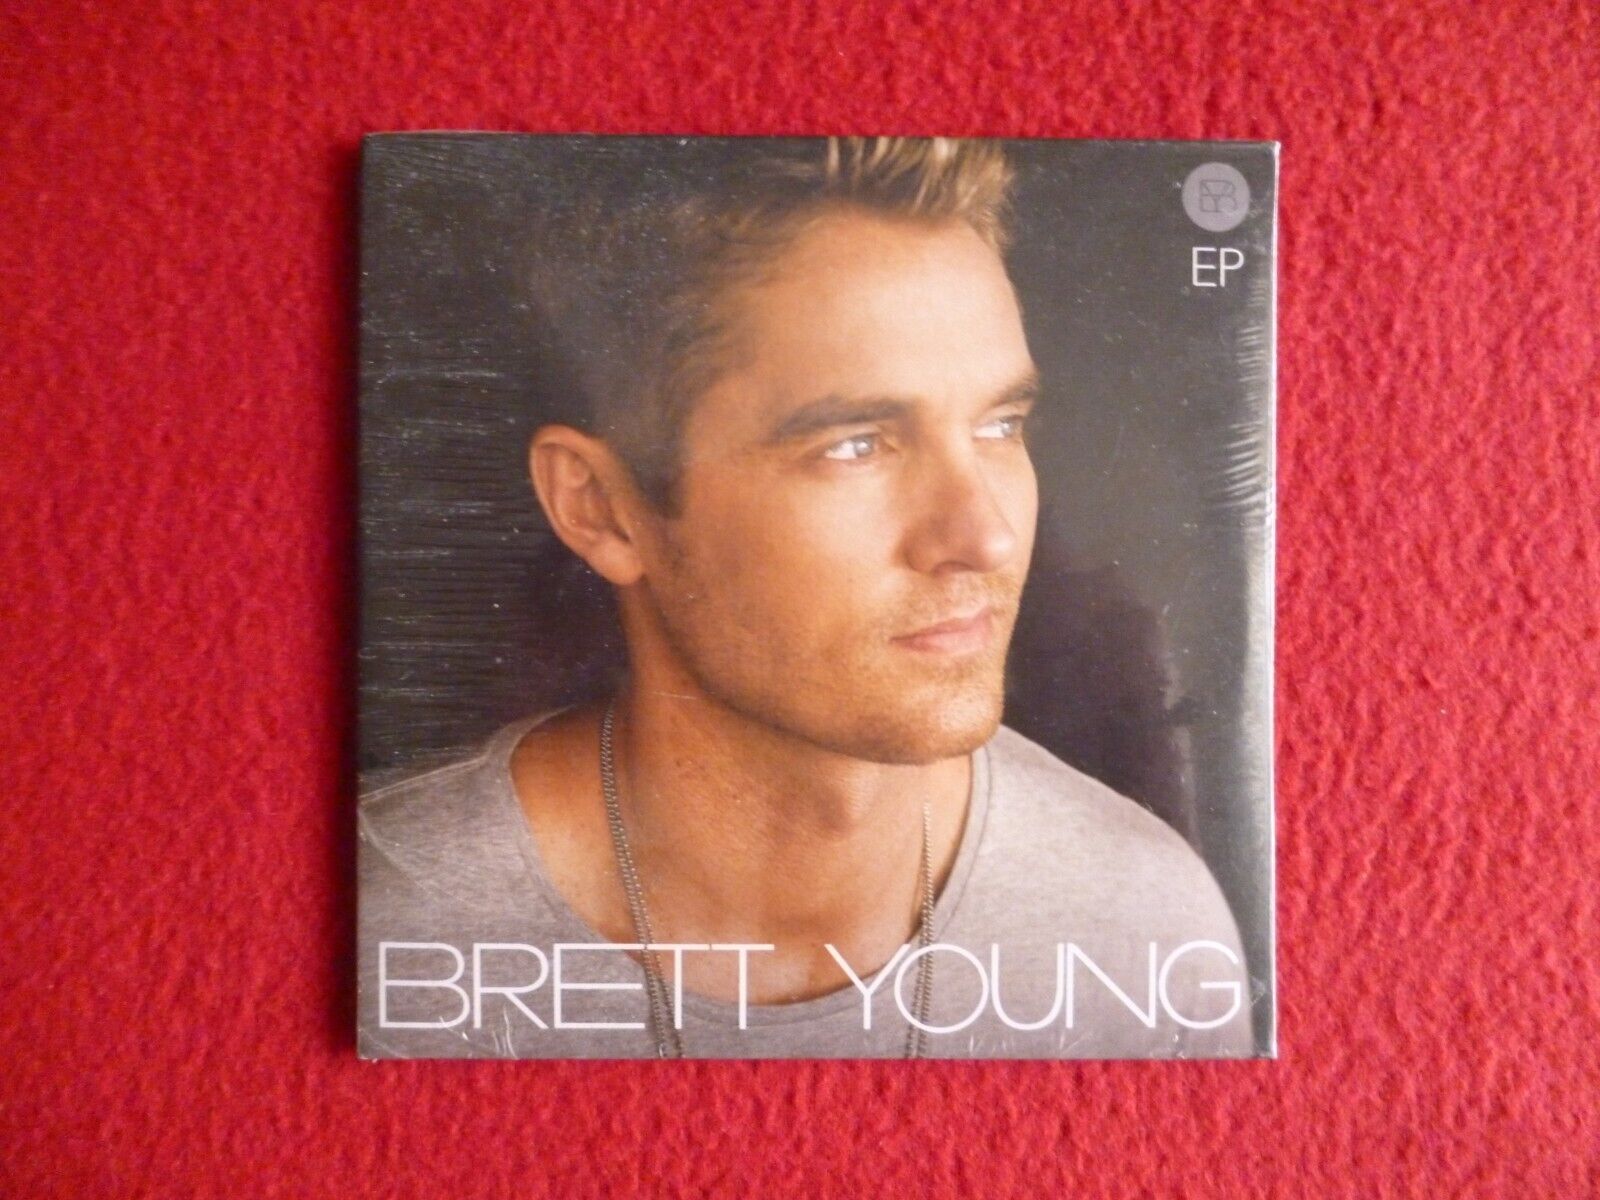 BRETT YOUNG EP SLEEP WITHOUT YOU CD 2016 RARE BRAND NEW